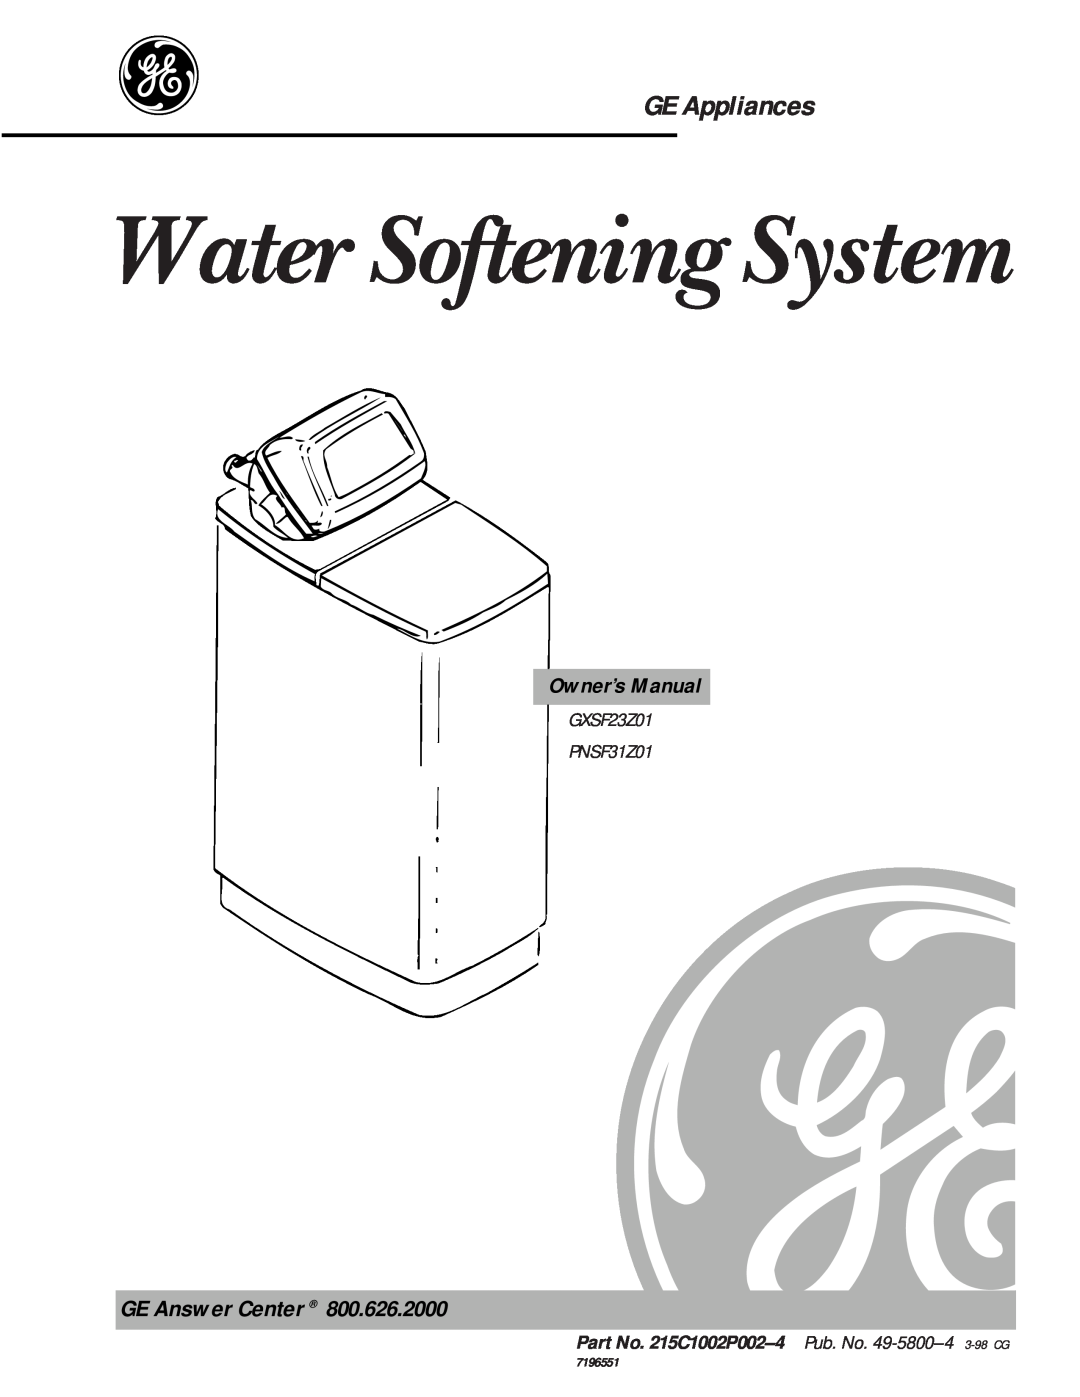 GE FNSF31Z01 owner manual GE Answer Center, Owner’s Manual, GXSF23Z01 PNSF31Z01, Water Softening System, GE Appliances 